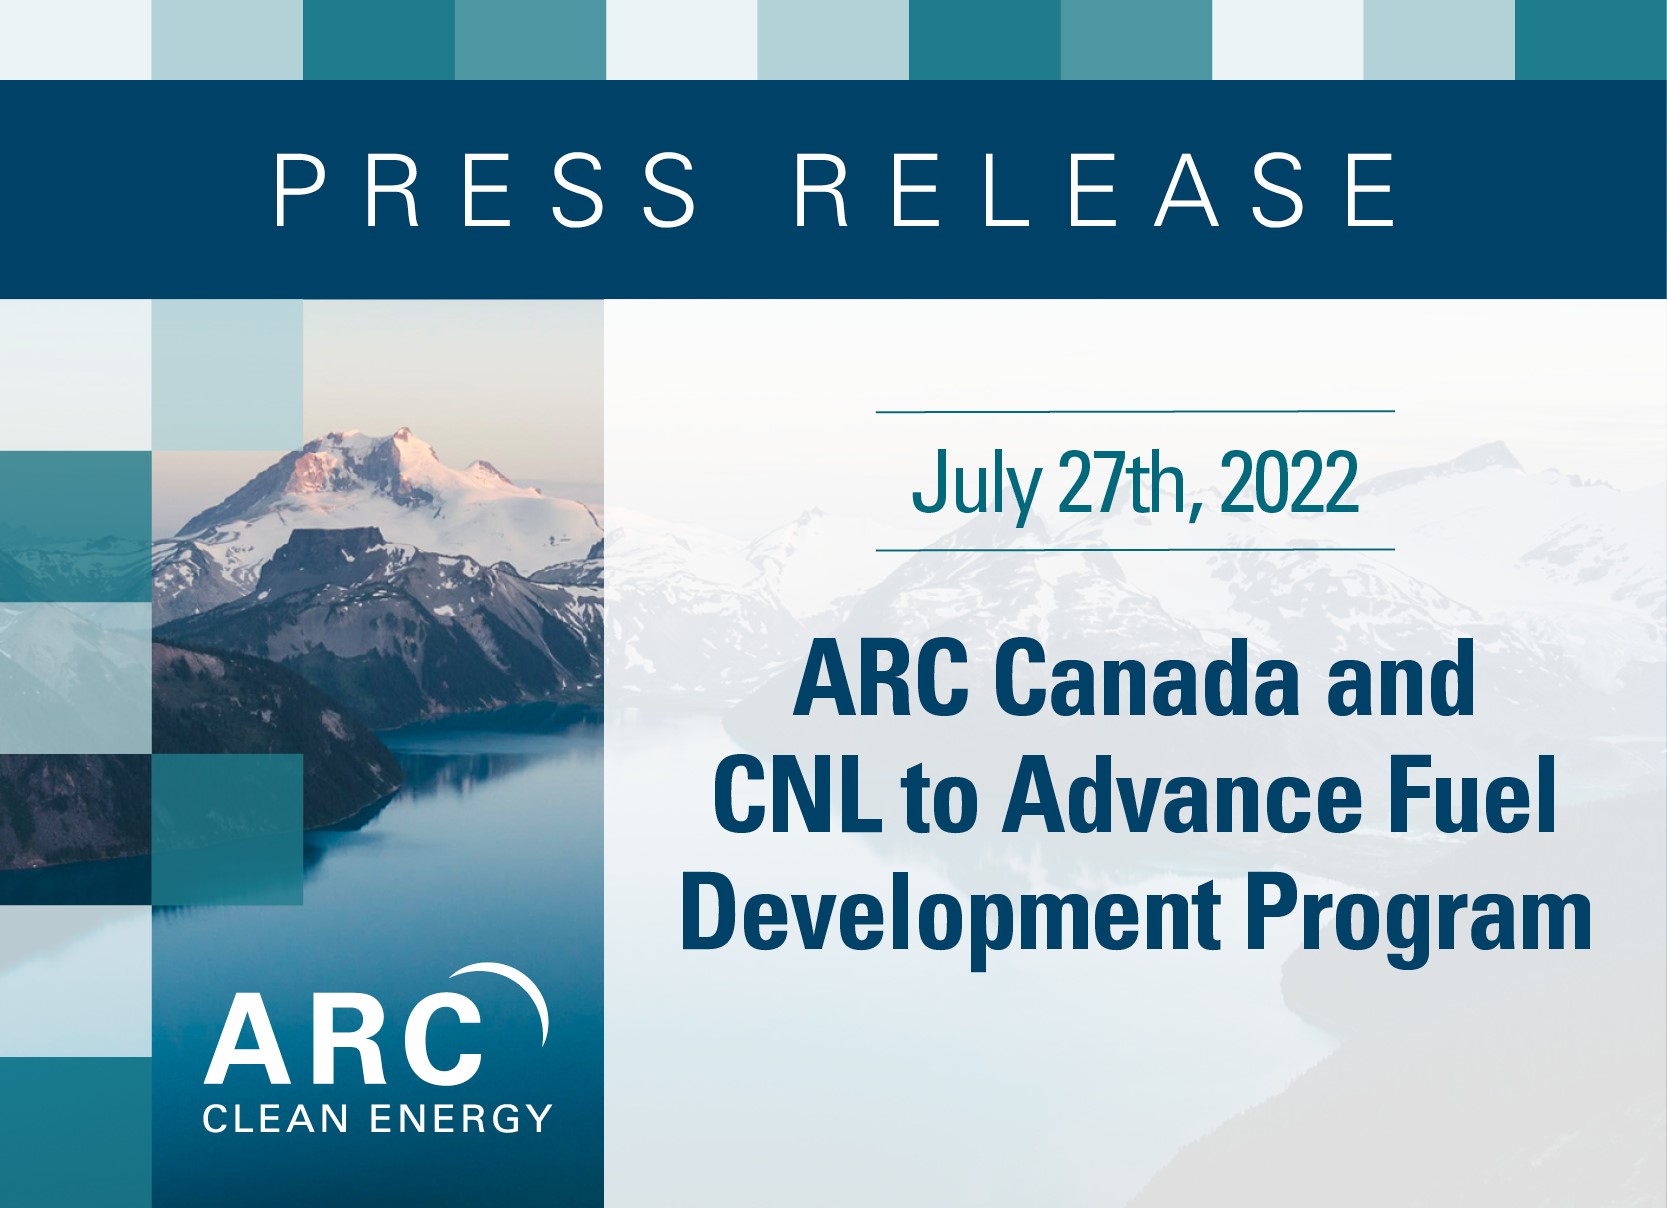 ARC CANADA PARTNERS WITH CANADIAN NUCLEAR LABS TO ADVANCE FUEL DEVELOPMENT PROGRAM